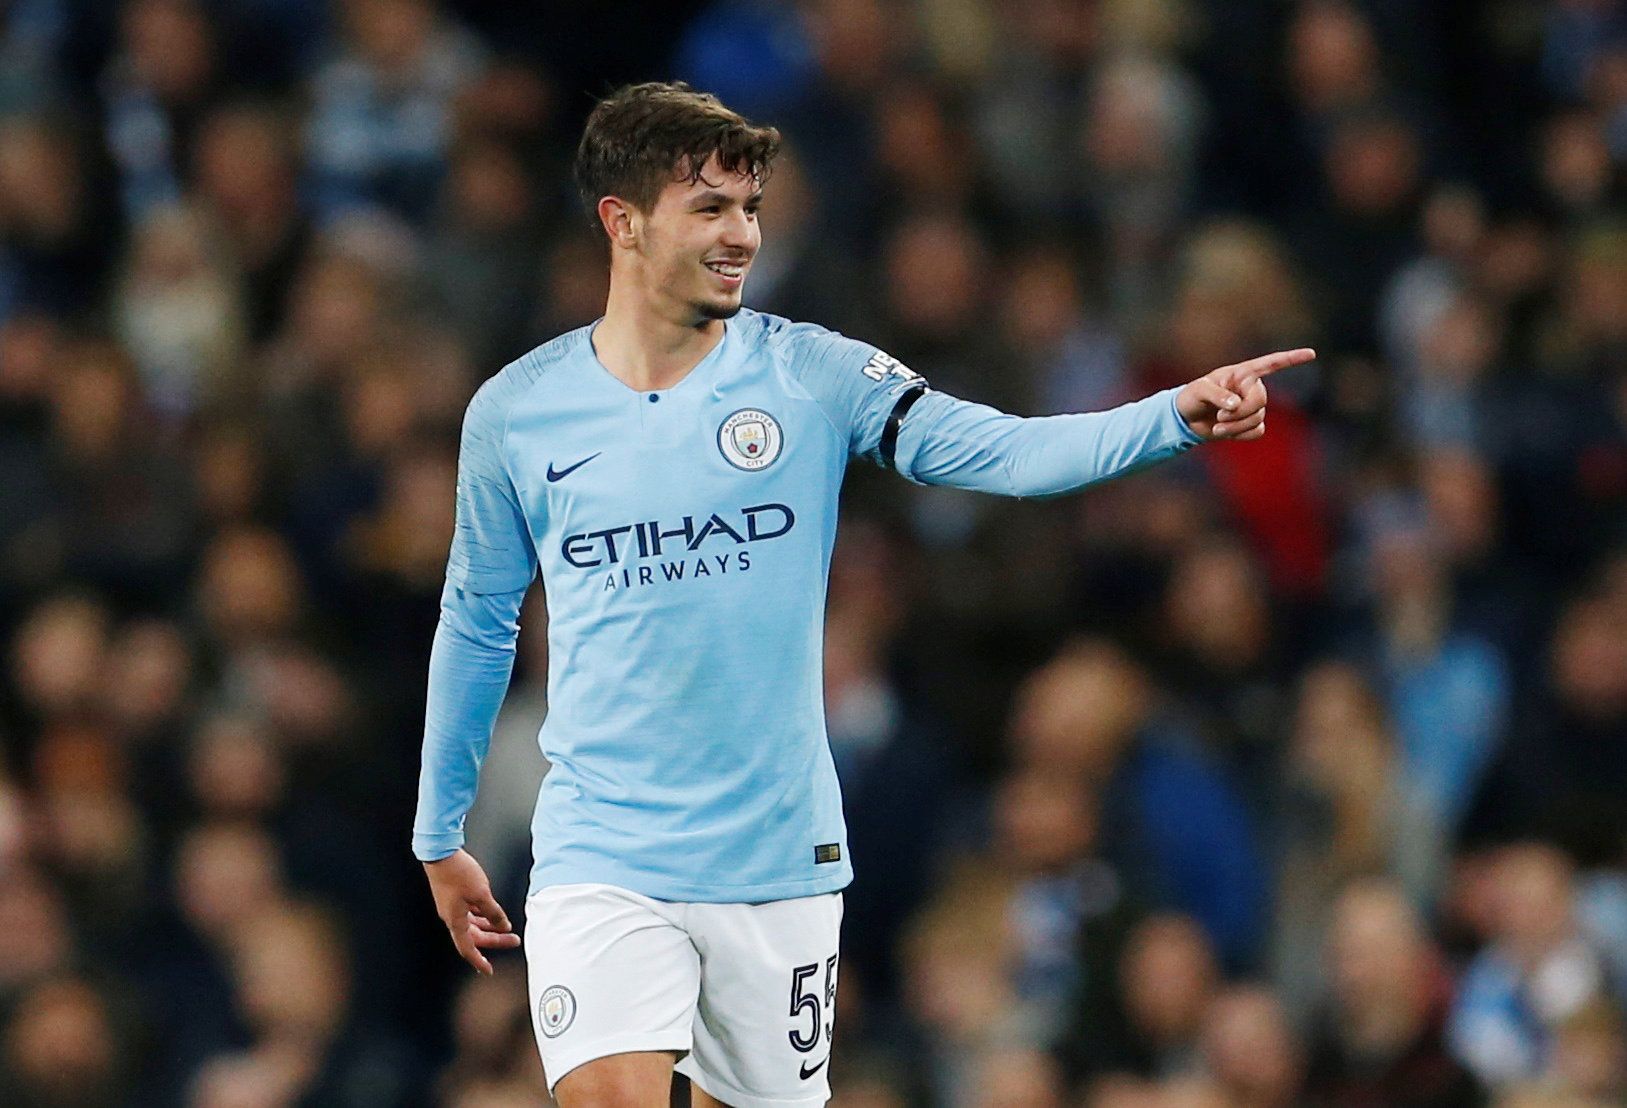 Soccer Football - Carabao Cup Fourth Round - Manchester City v Fulham - Etihad Stadium, Manchester, Britain - November 1, 2018  Manchester City's Brahim Diaz celebrates scoring their first goal        Action Images via Reuters/Craig Brough